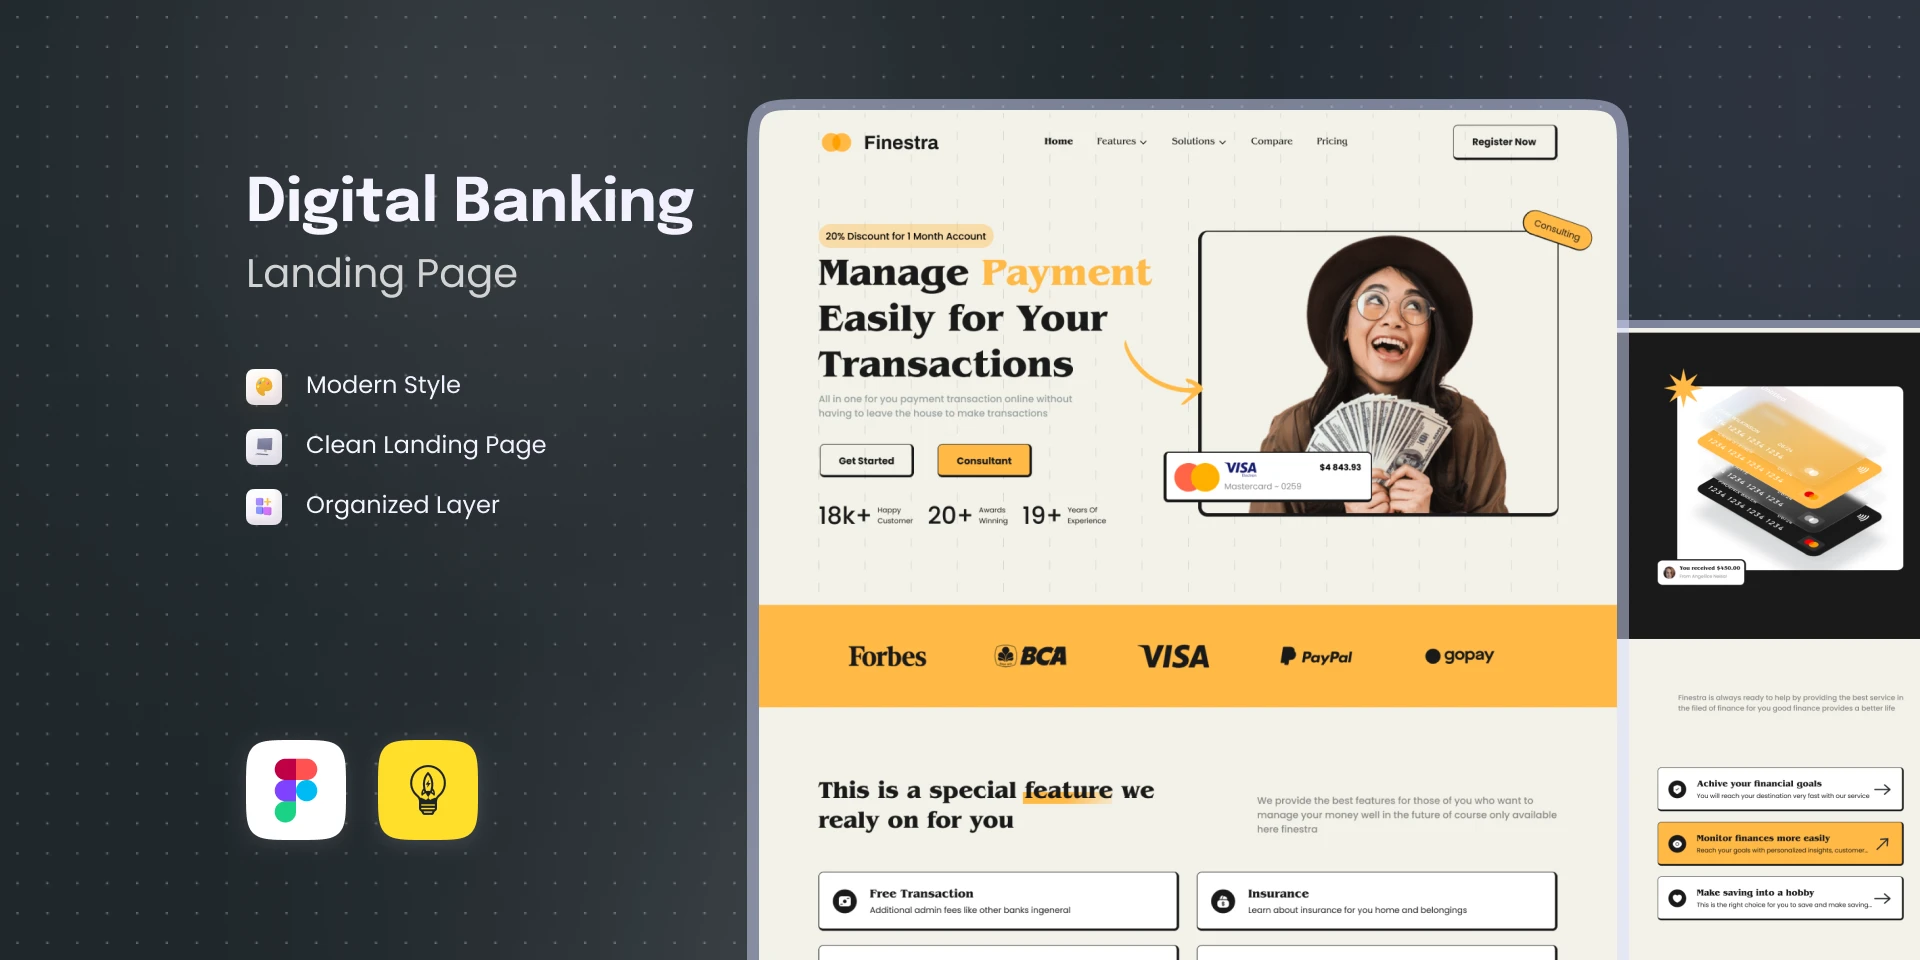 Finestra - Digital Banking Landing Page - Only $5 for Figma and Adobe XD